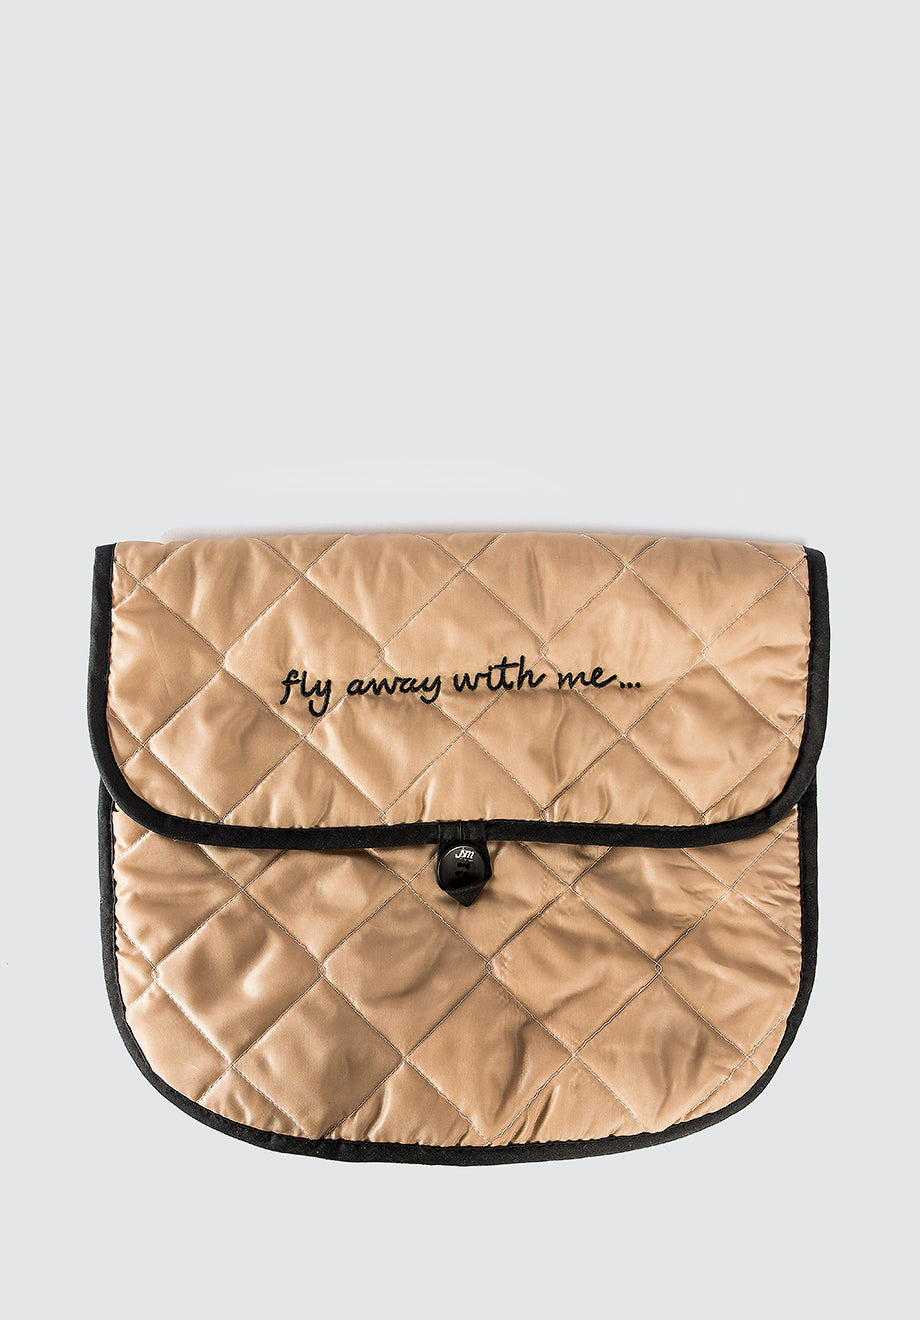 Lingerie Travel Bag | Fly Away With Me